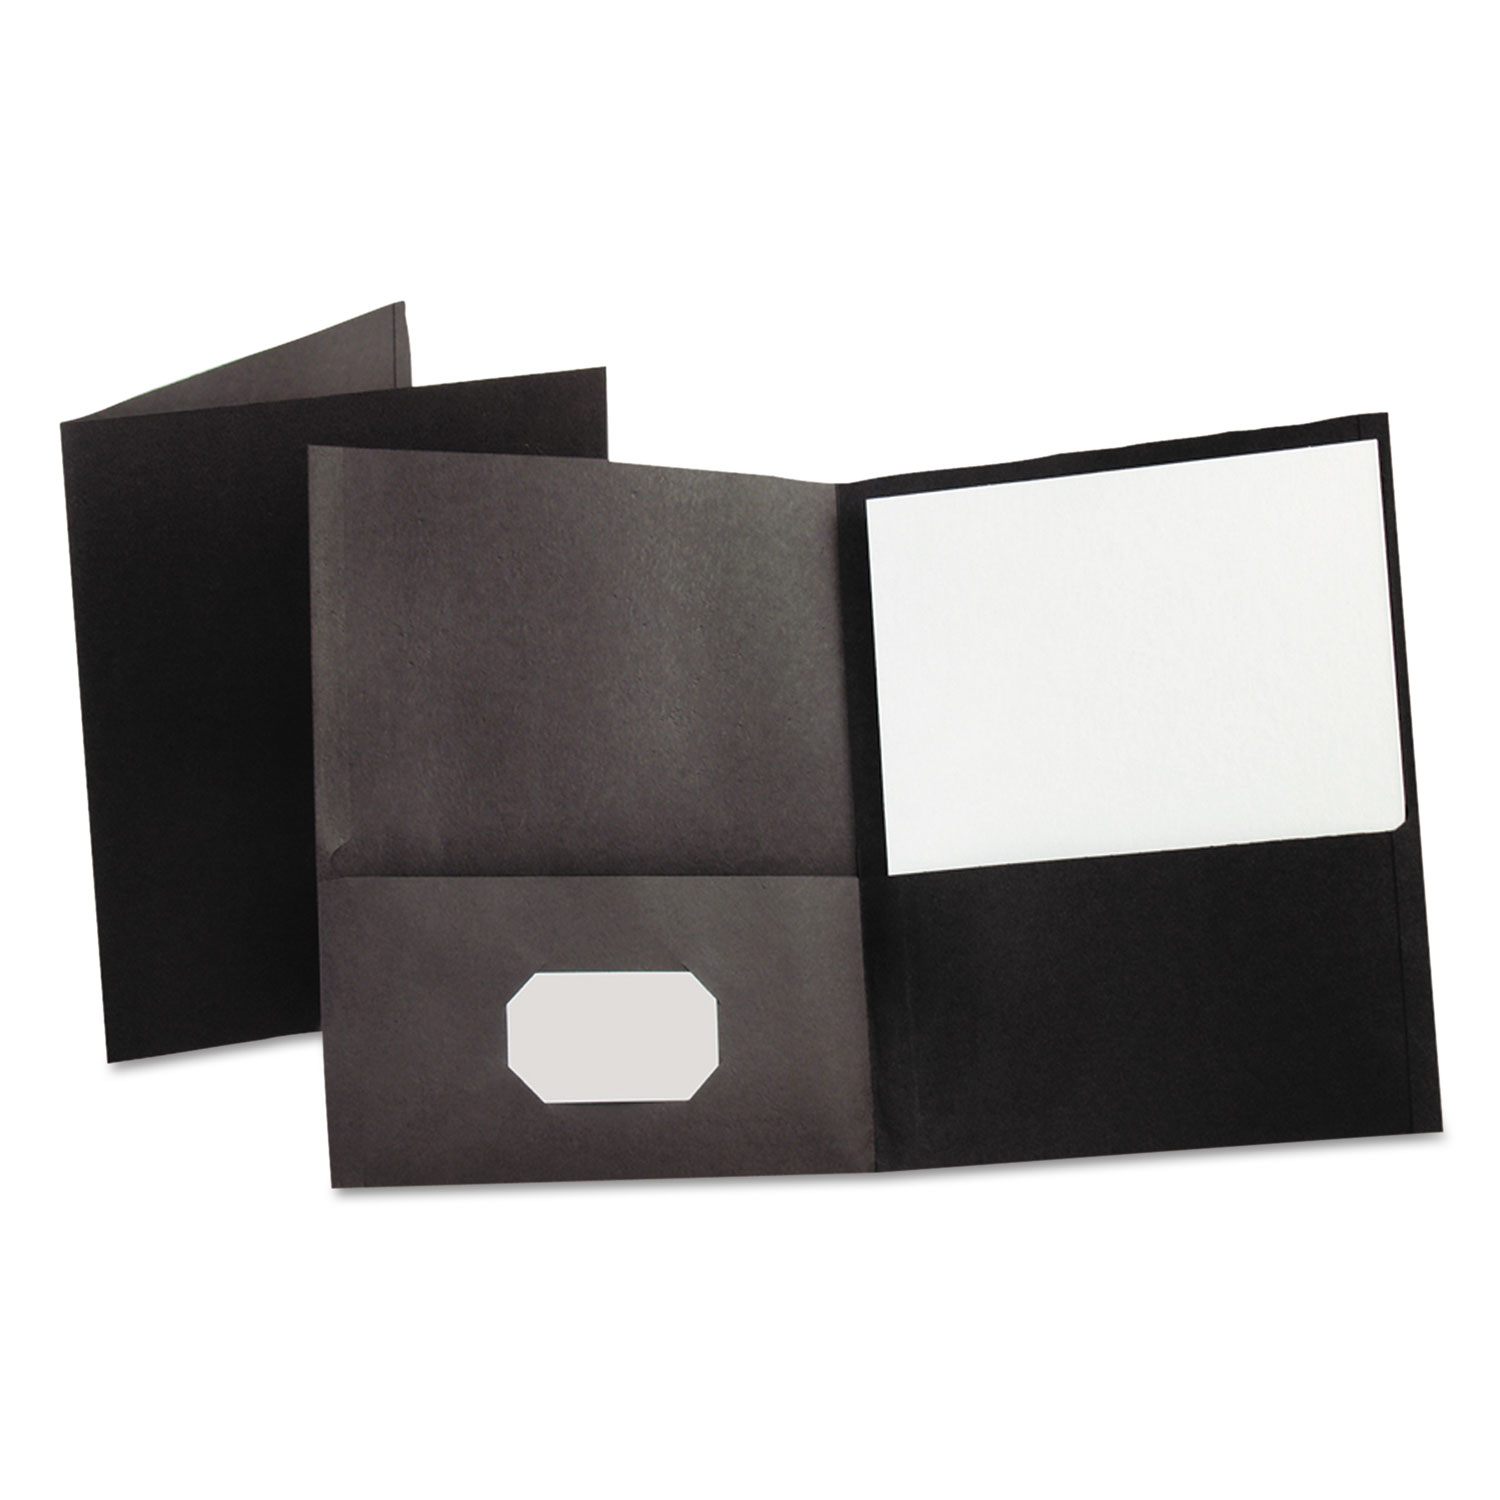 White Box of 25 New Letter Size Twin-Pocket Folders Textured Paper Holds 100 Sheets 